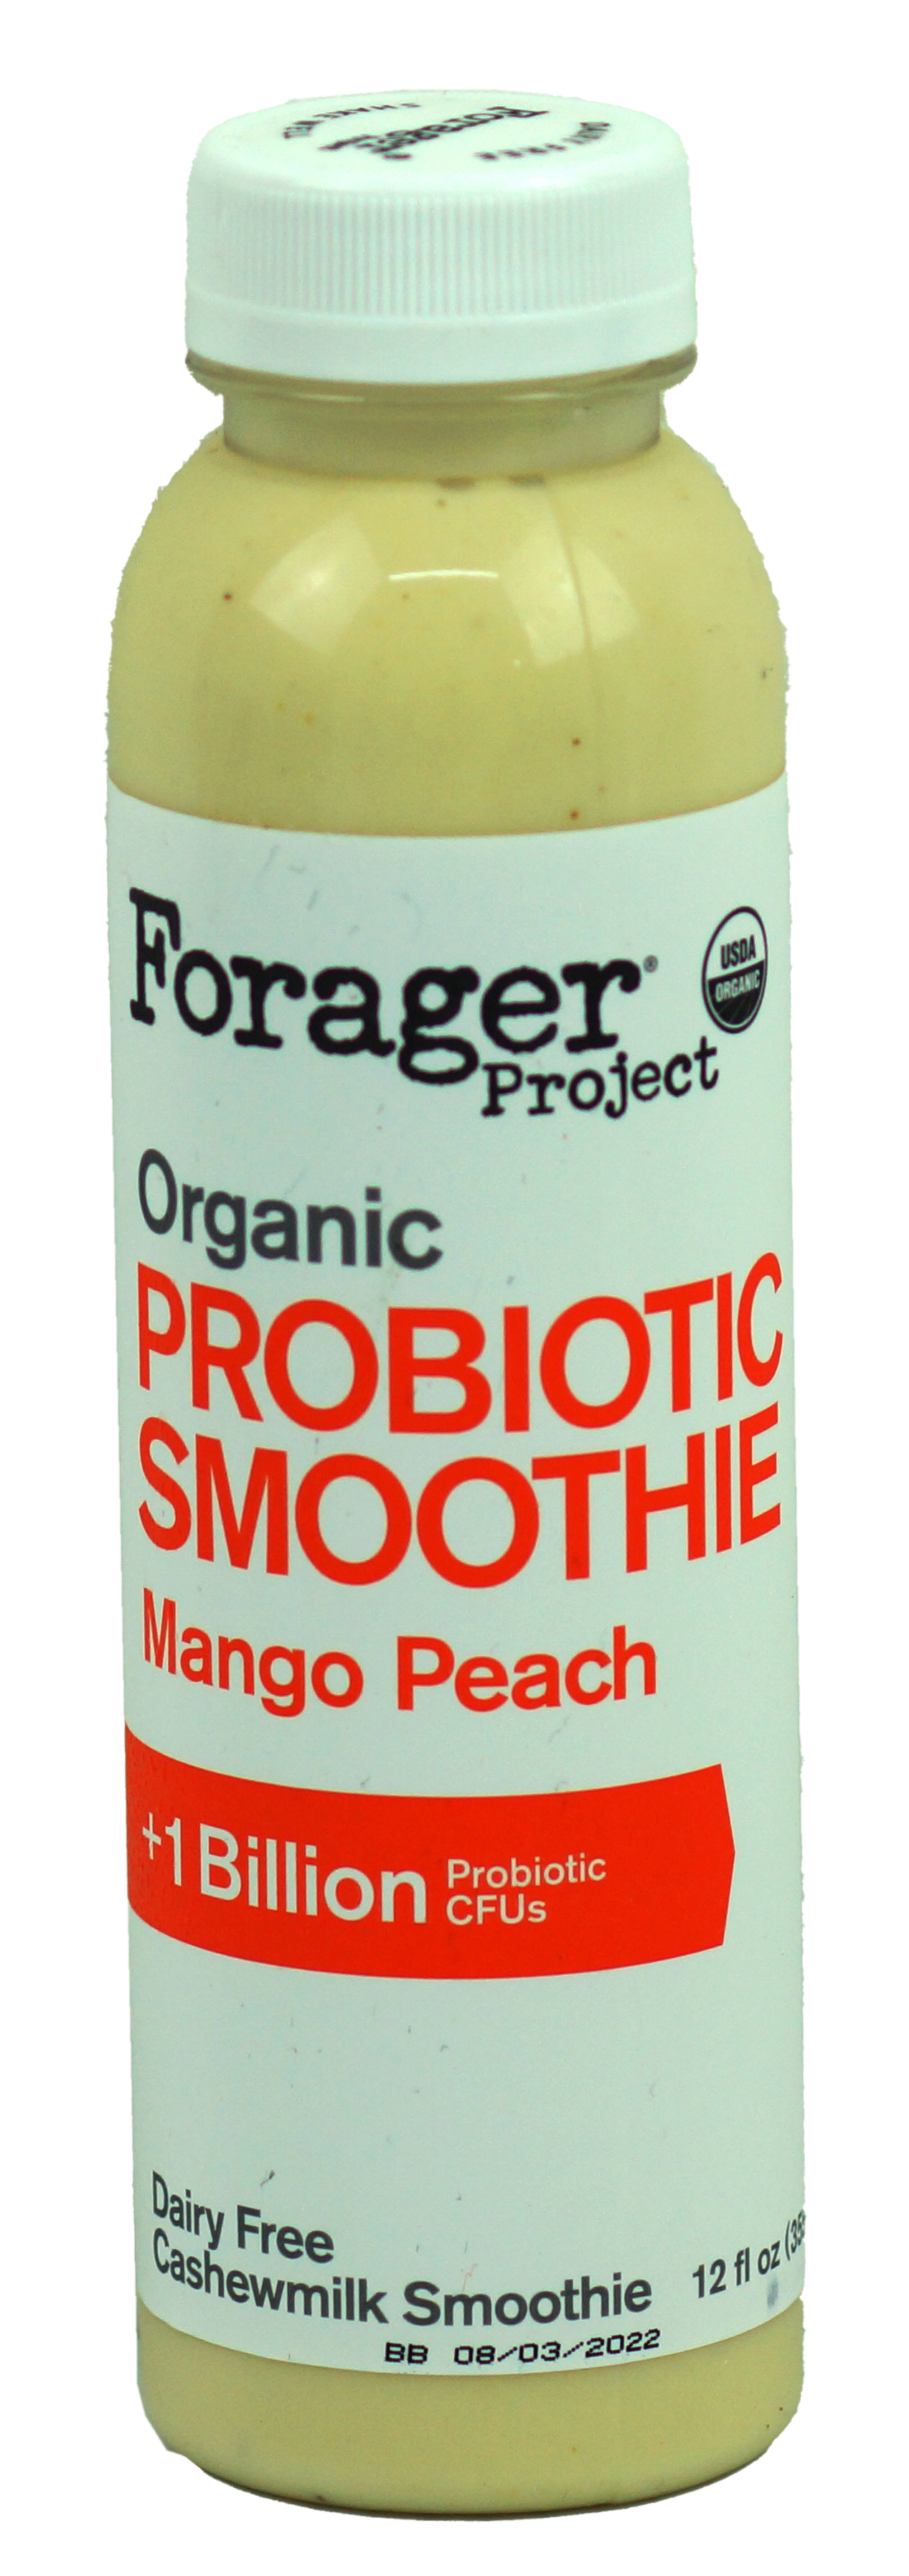 Forager Project Organic Probiotic Smoothie Mango Peach (Store Pick-Up Only)